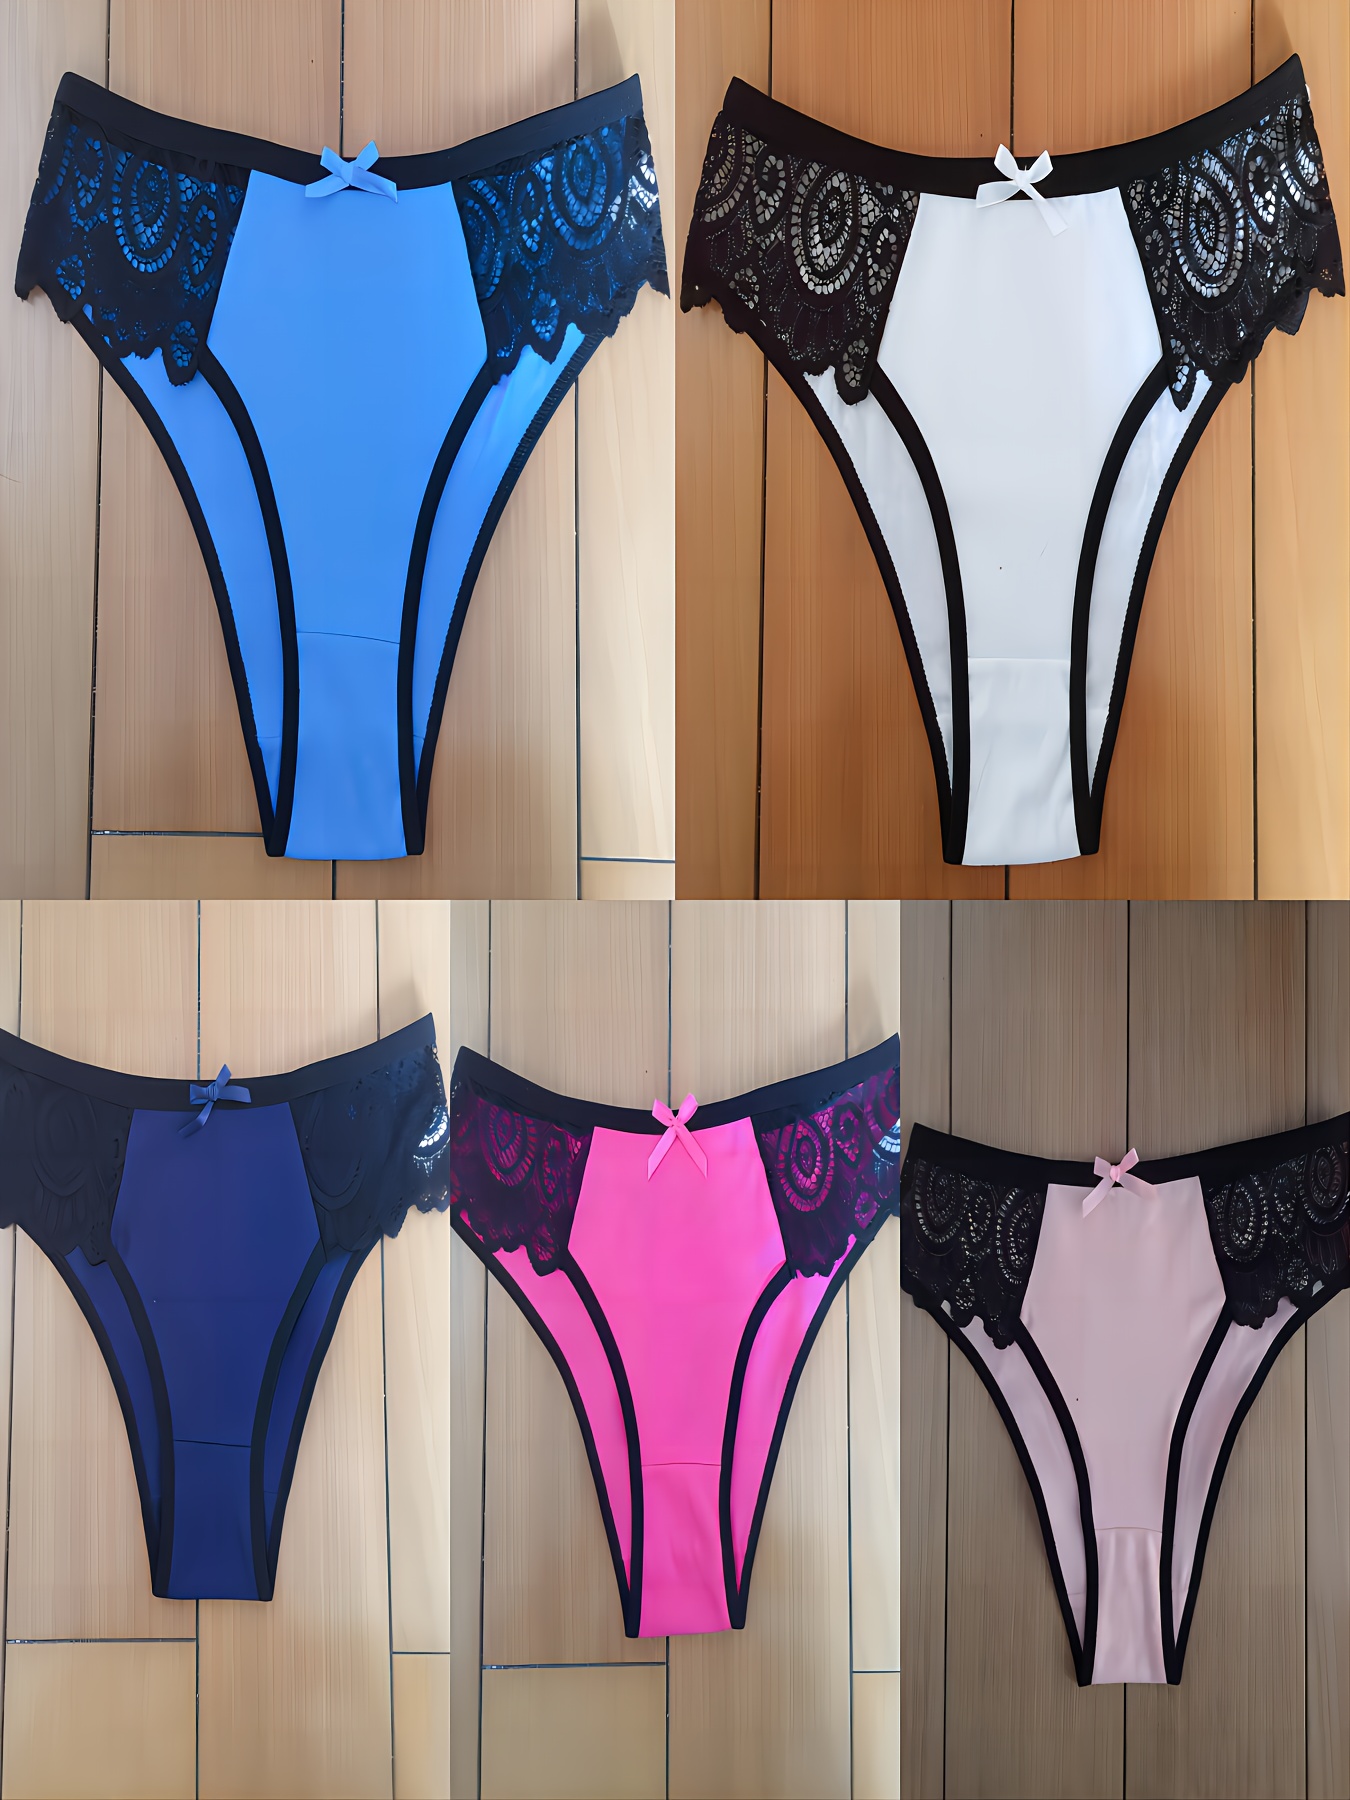 In love with coquette panties and tops#coquette #coquetteaesthetic #co, coquette underwater